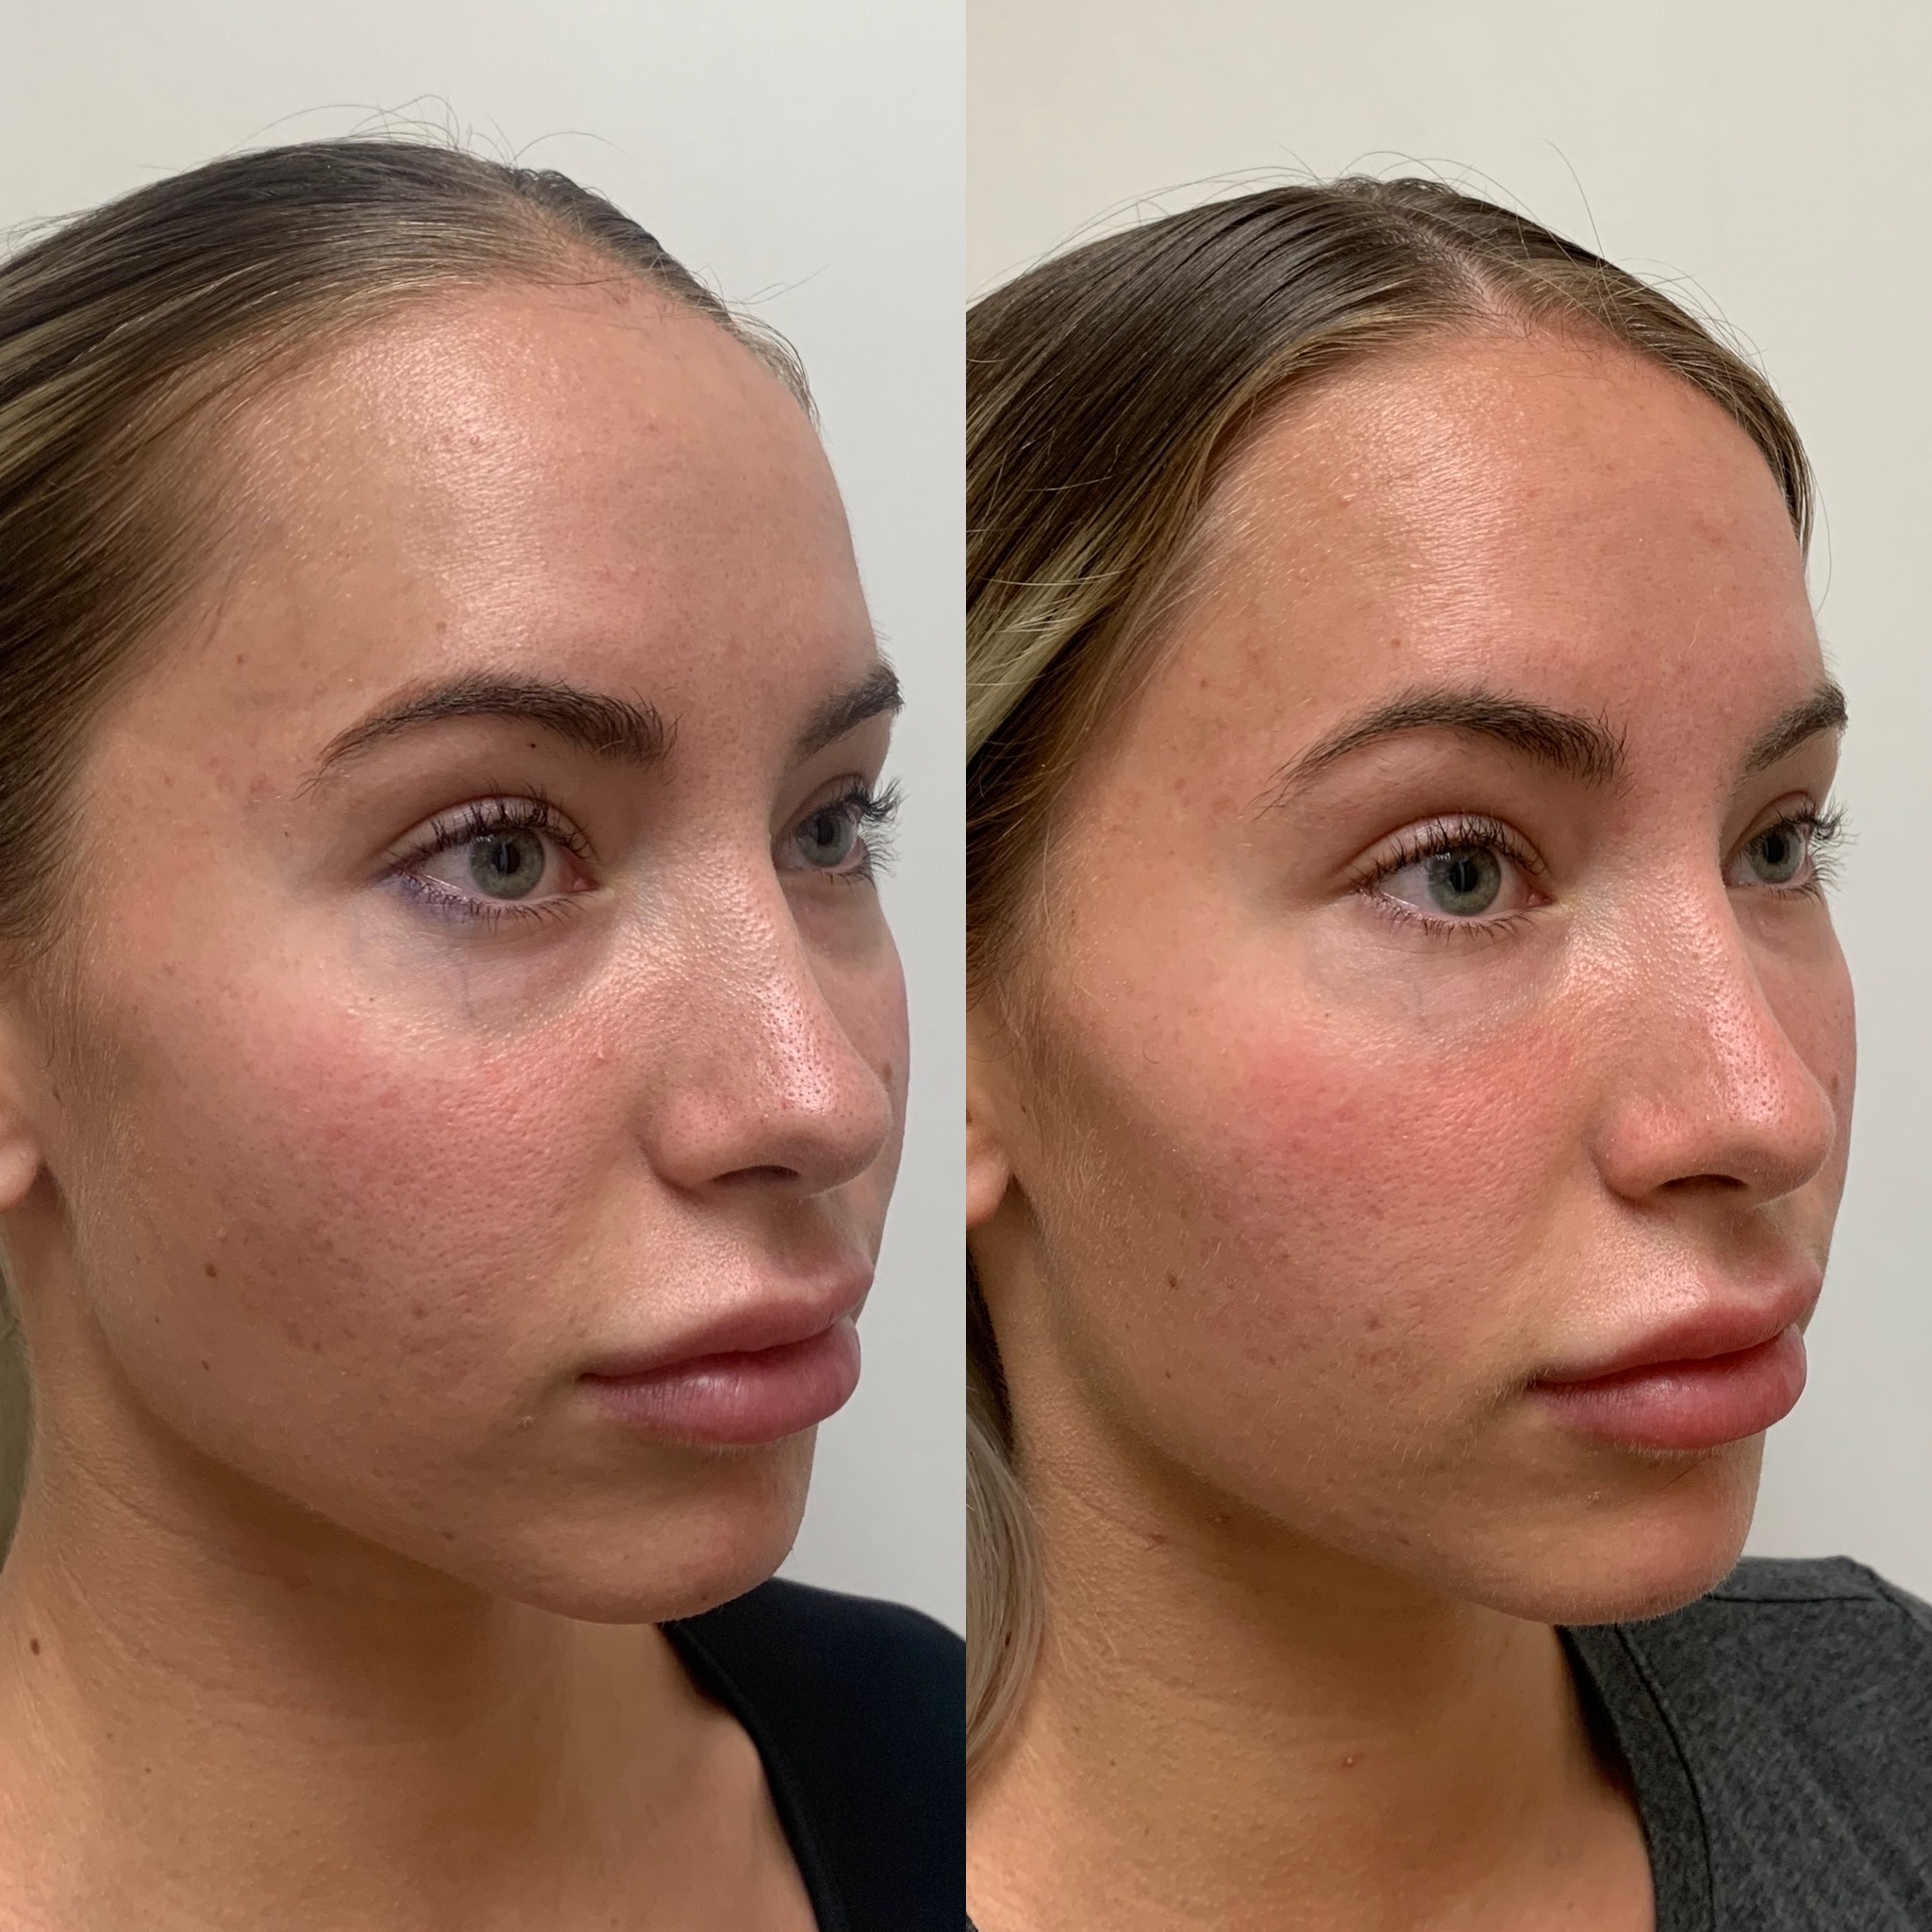 Before and After Fillers Treatment on Lips | Beauty Boost Med Spa in Newport Beach, CA